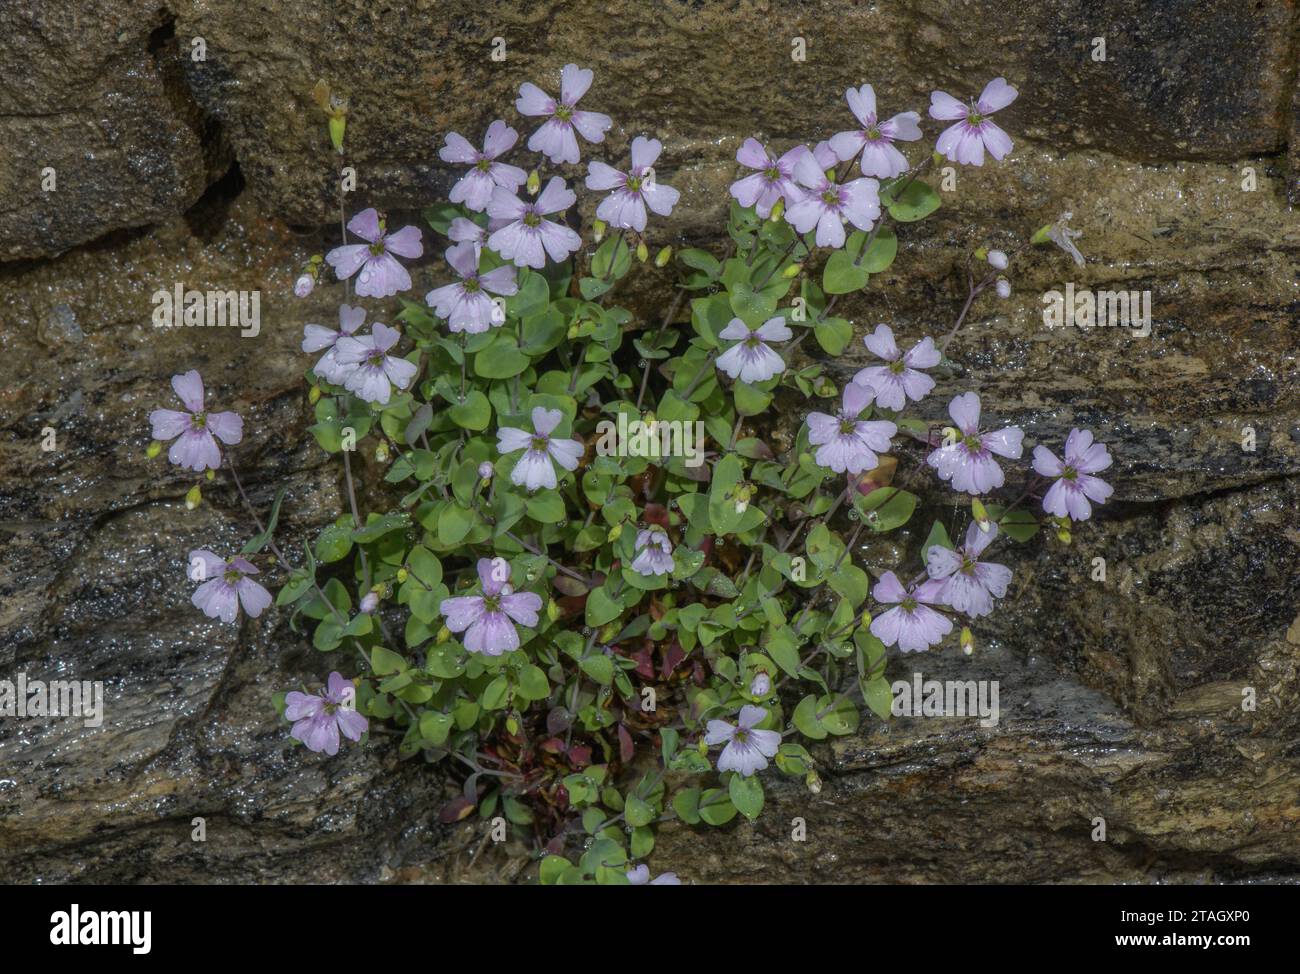 Petrocoptis, Silene glaucifolia, in flower on cliff in the French Pyrenees. Stock Photo